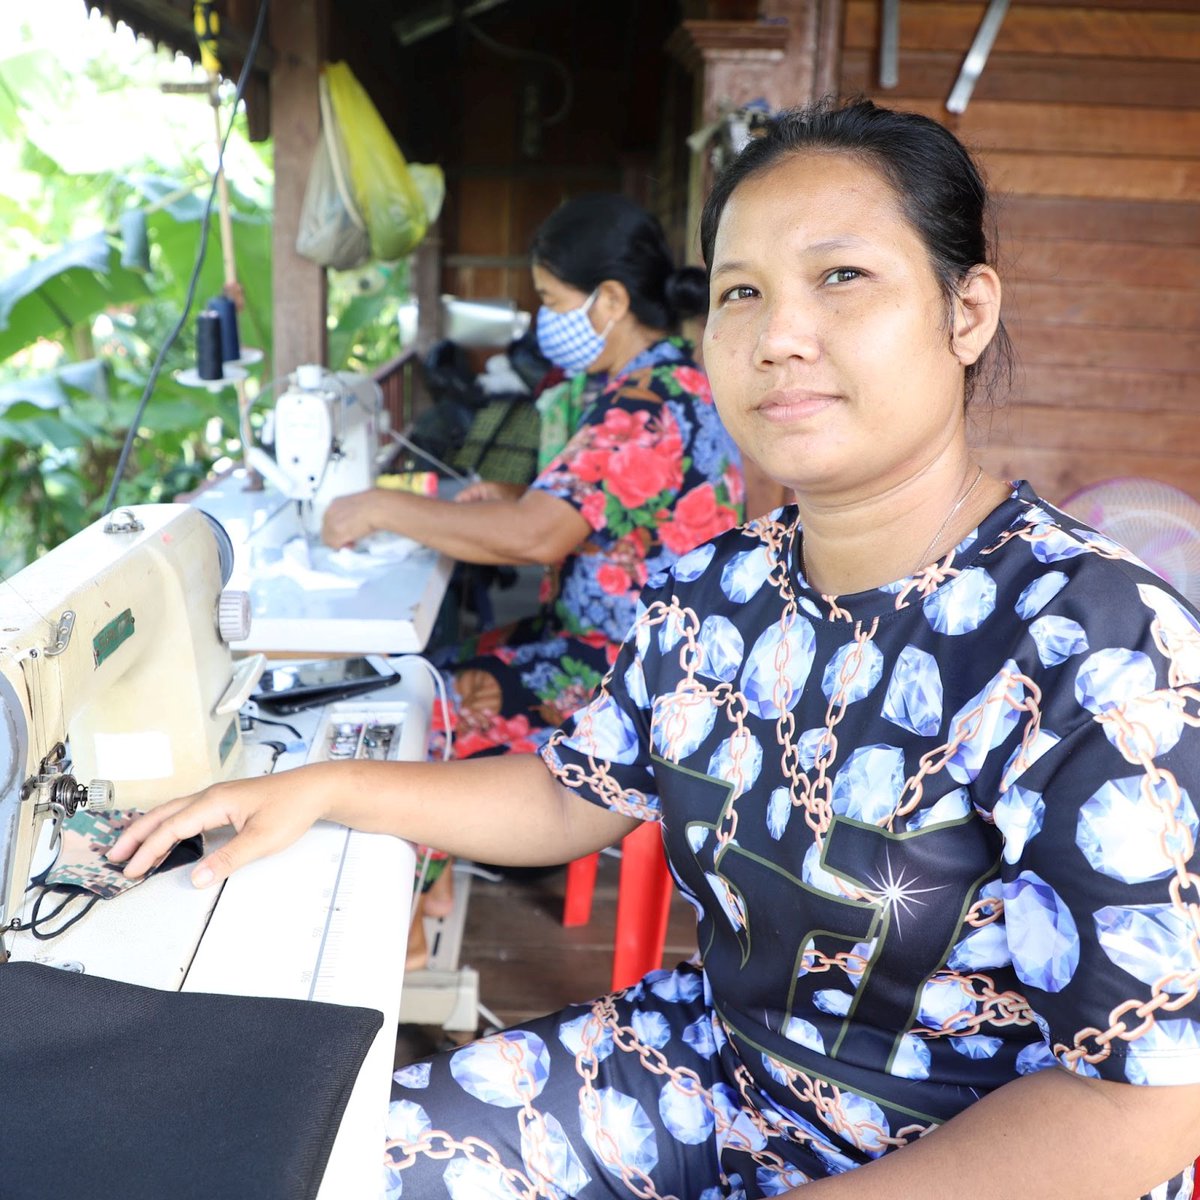 Meet Ms Nimol and Ms Pov. After completing our Sewing Project, they started their own small business. Now, they’ve secured contracts to sew between 300 and 500 articles of clothing each month - earning enough income to support their entire families.